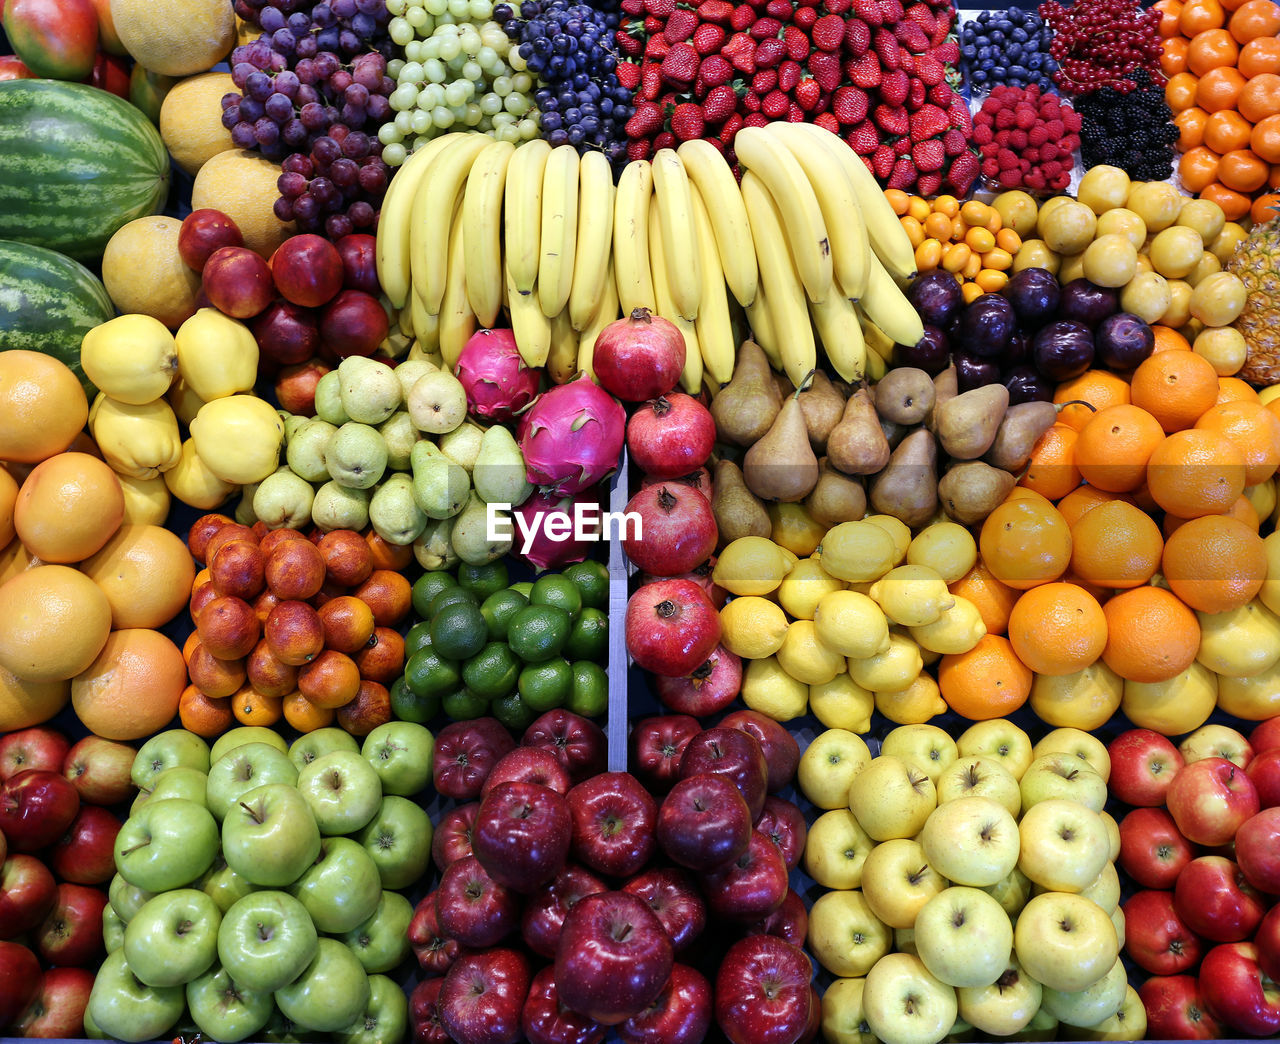 VARIOUS FRUITS IN MARKET STALL AT SALE